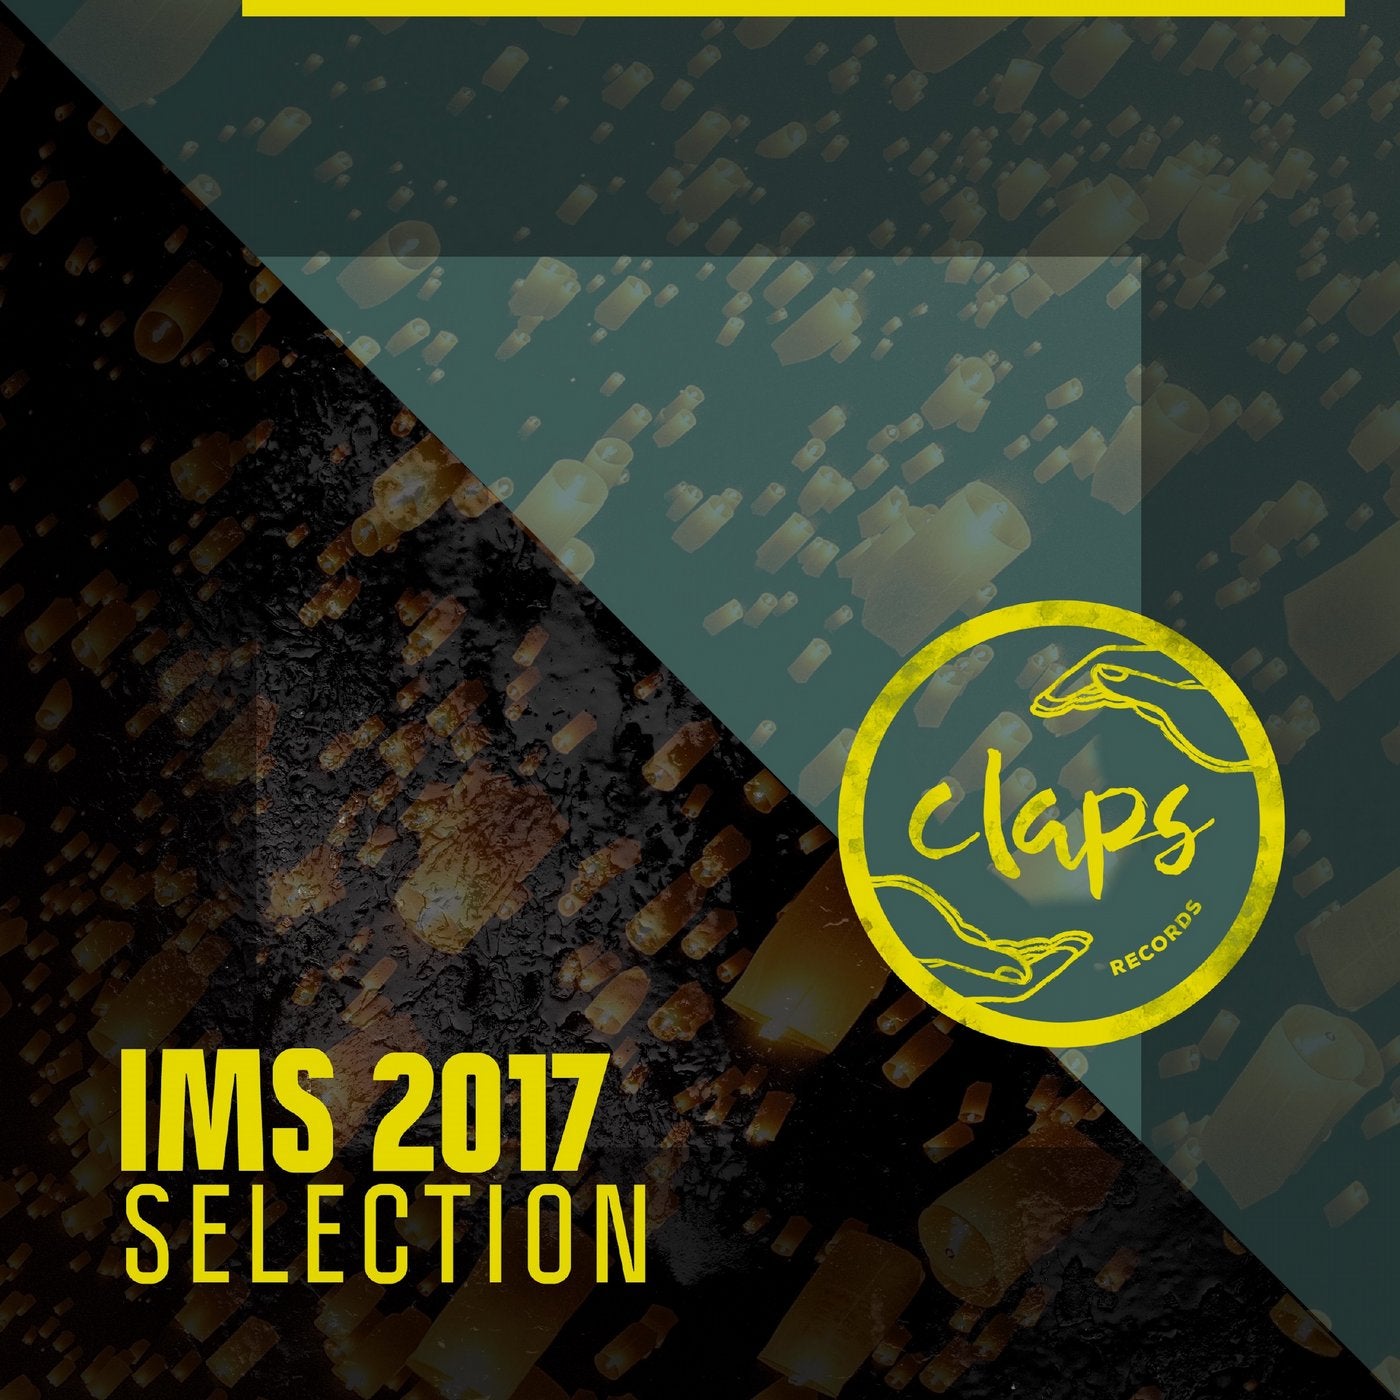 IMS 2017 Selection